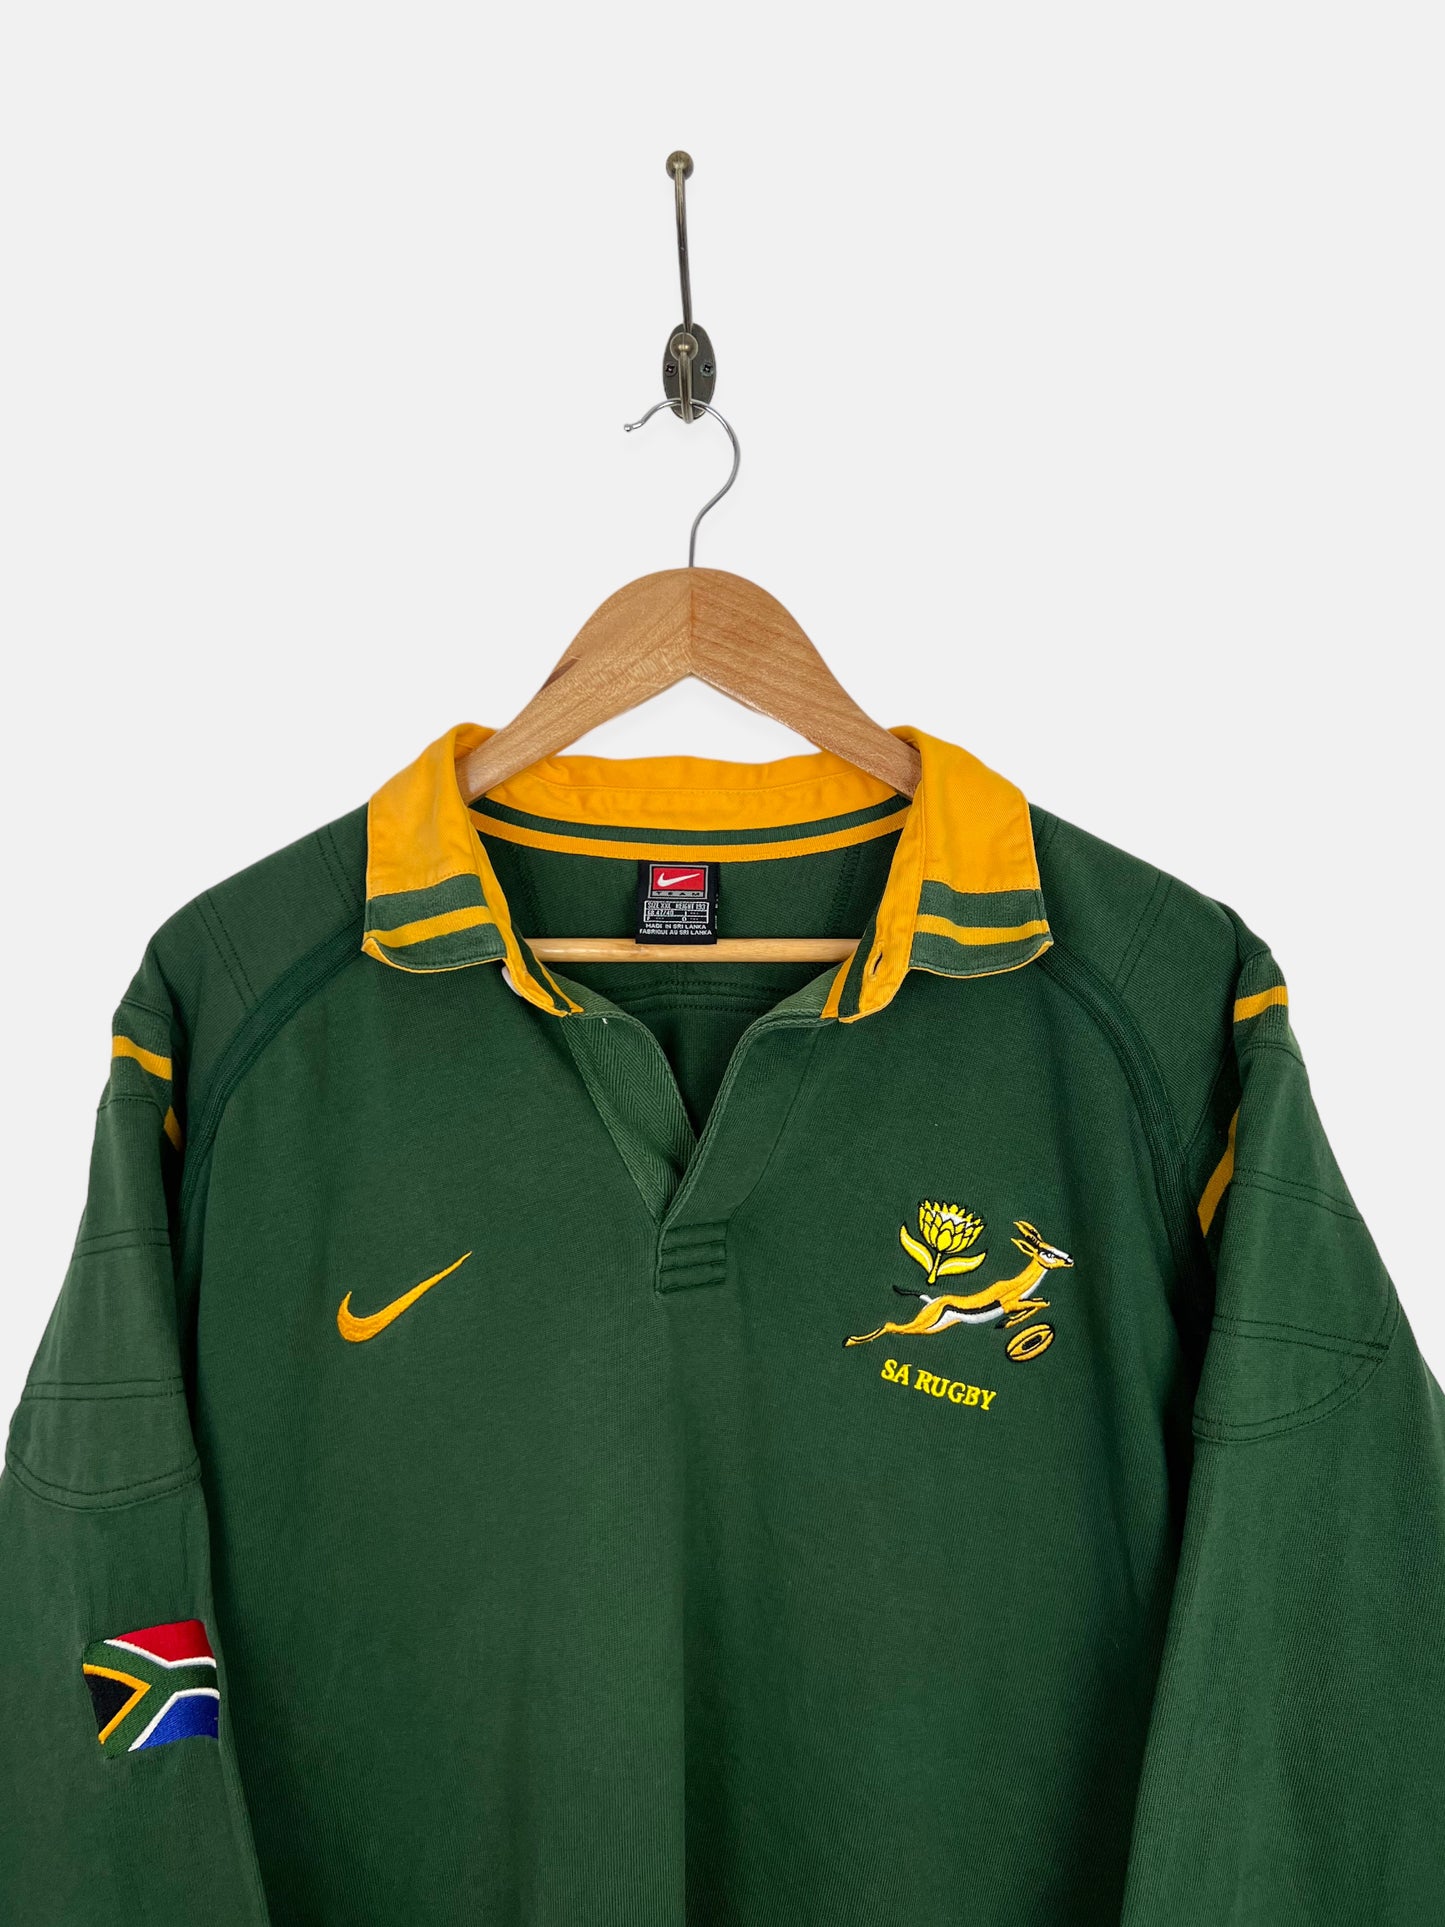 1999 Nike South Africa Embroidered Vintage Longsleeve Rugby Polo Size 2XL